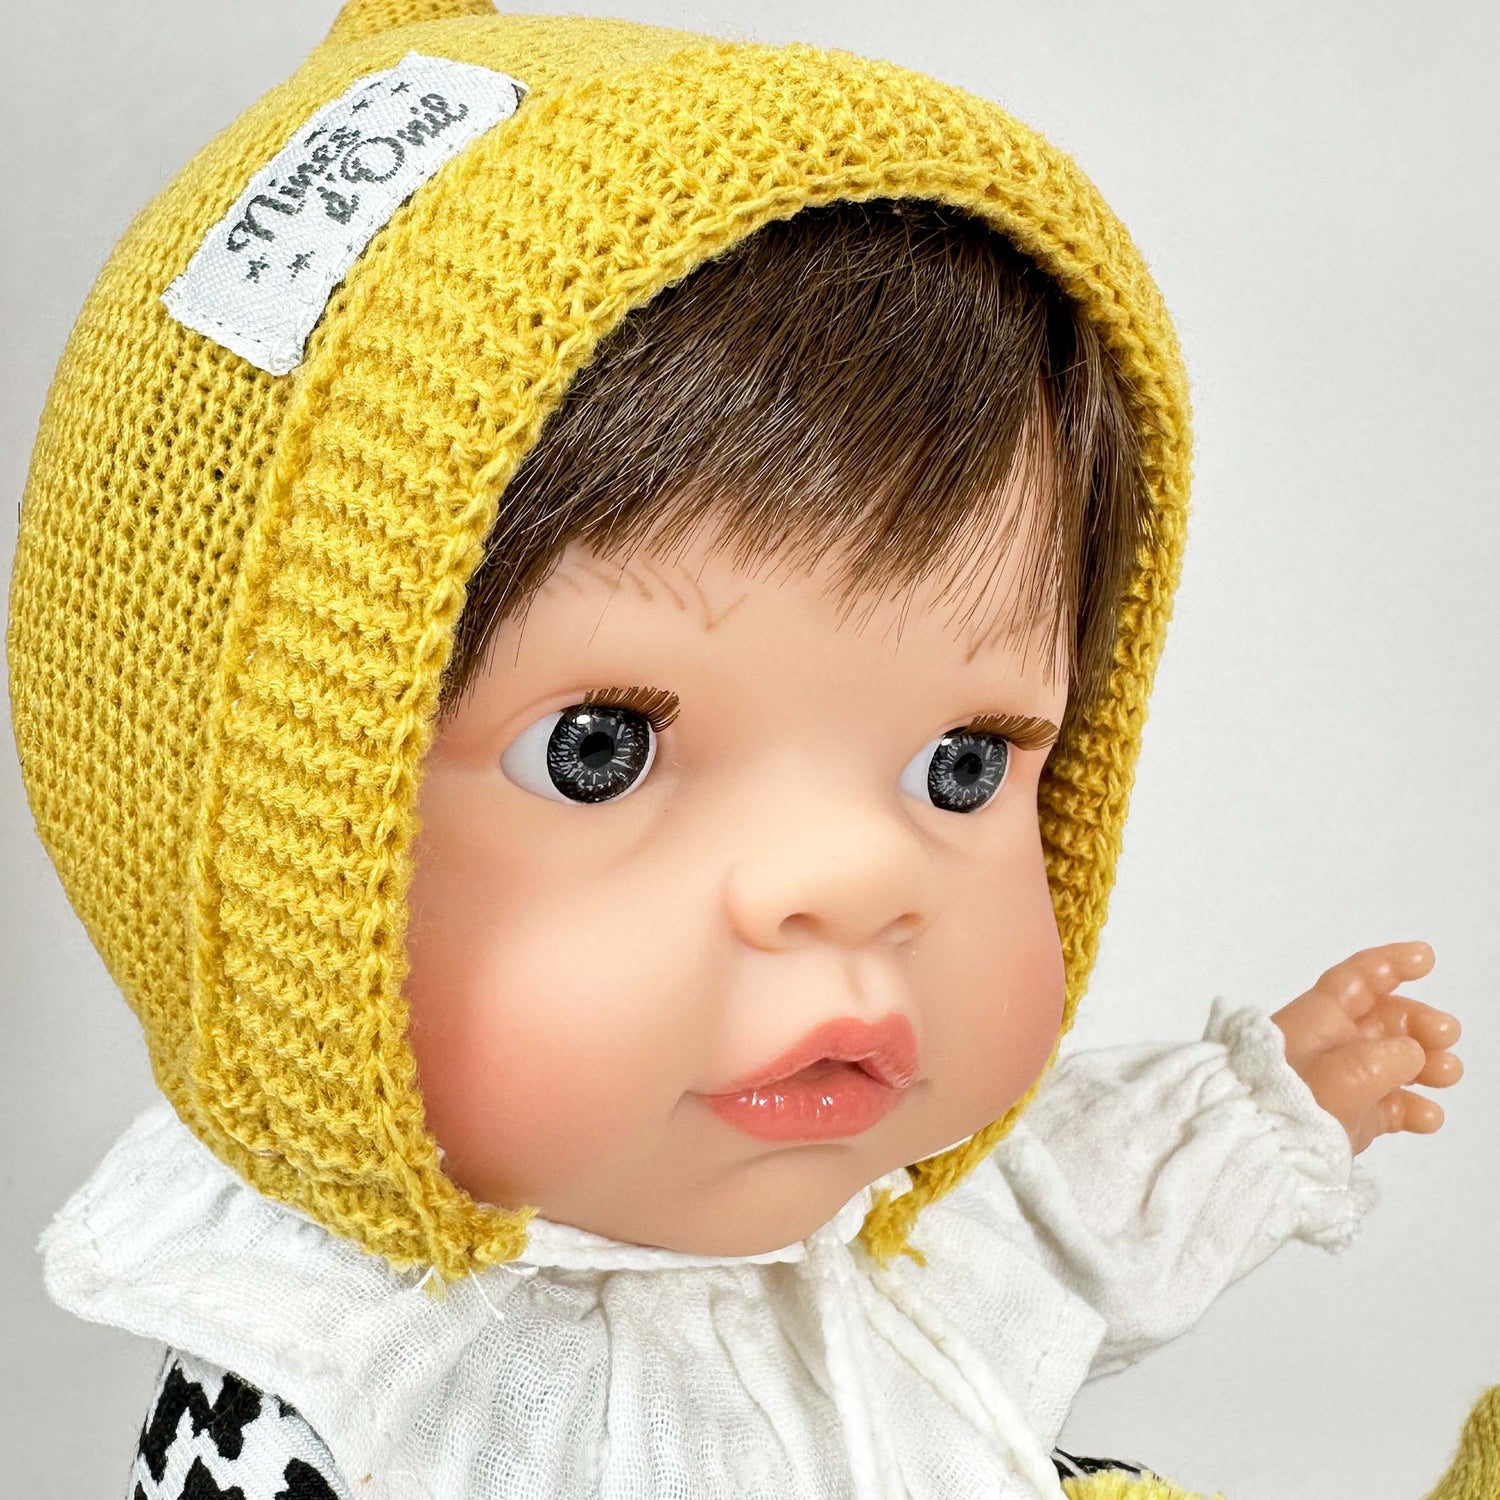 Handmade Collectible Joy Collection Baby Doll (3030) by Nines D&